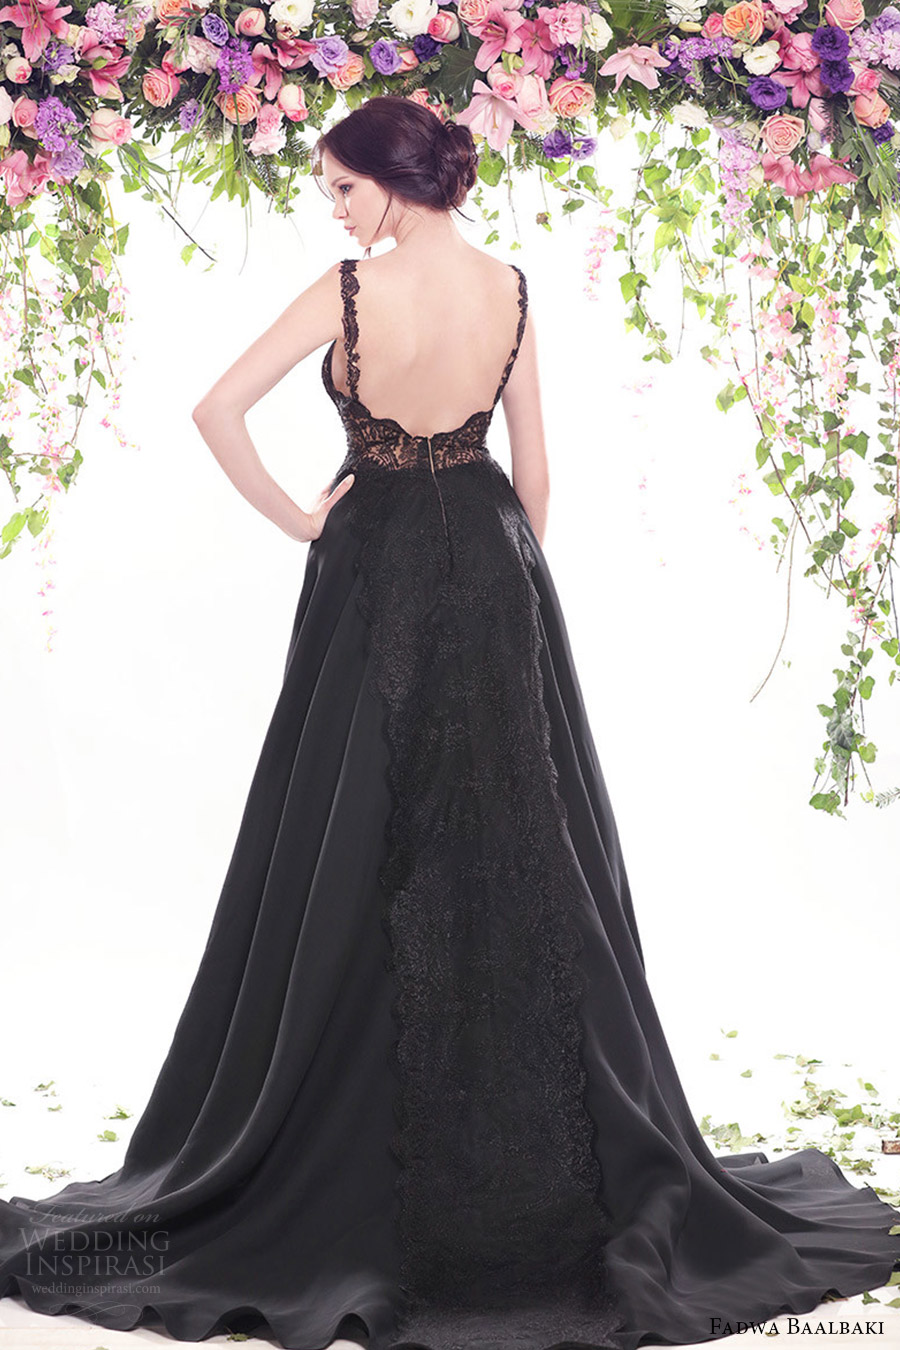 fadwa baalbaki spring 2016 couture strapless sweetheart black ball gown multi color bodice bv low back train